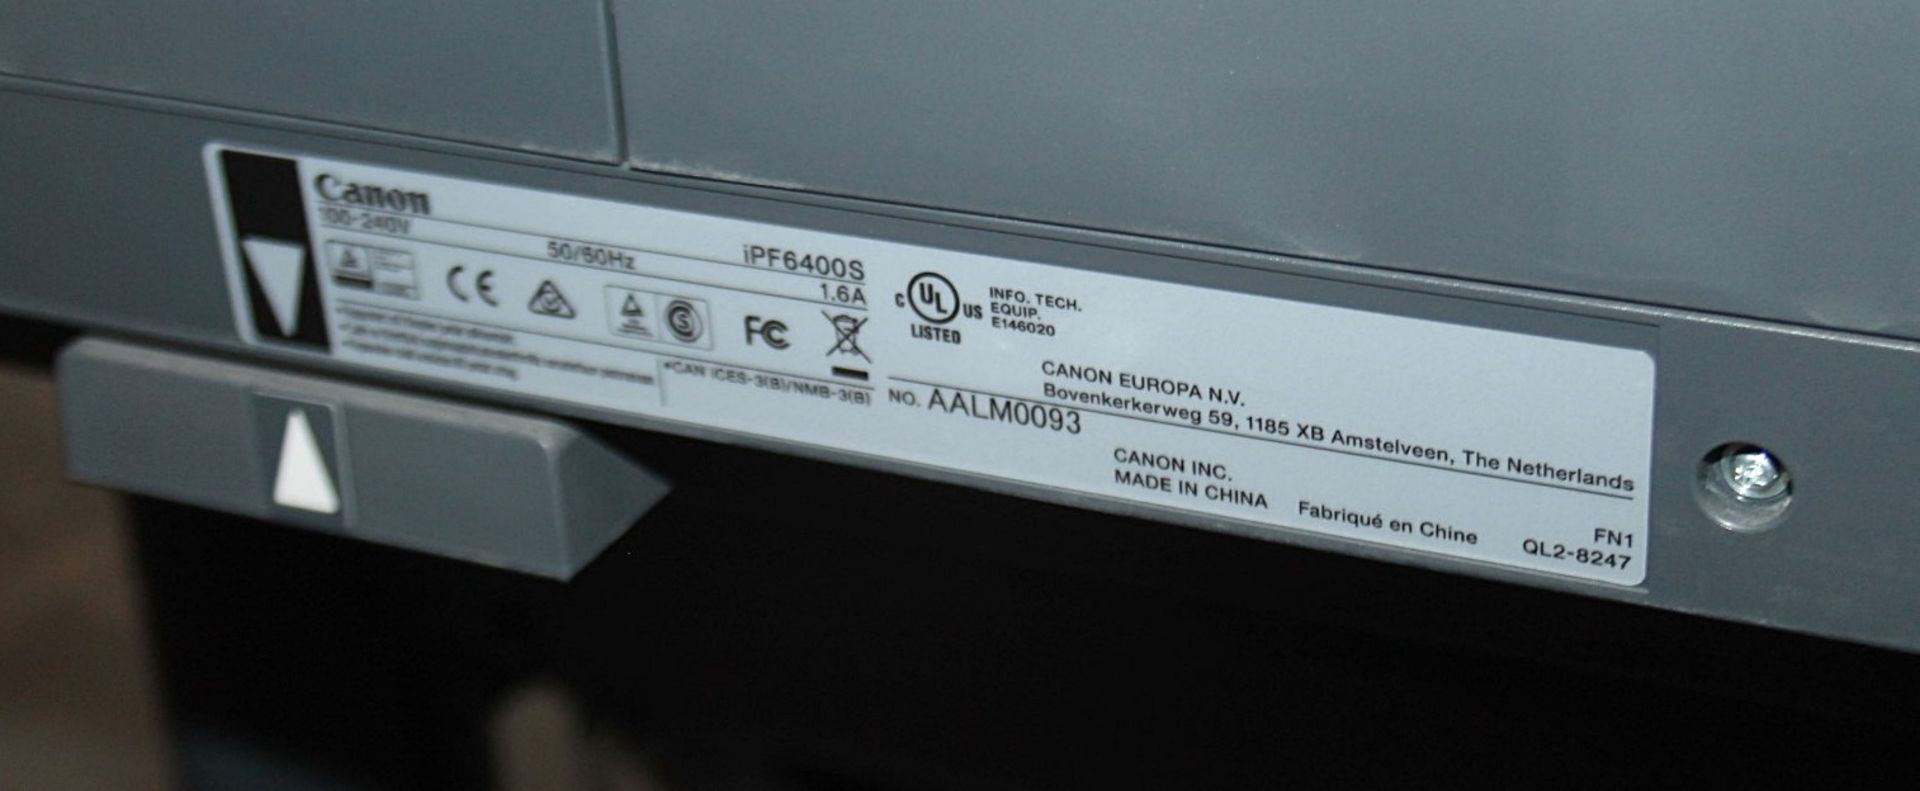 1 x Canon imagePROGRAF iPF6400 Printer Proofer - Pre-owned - Ref: Ma117 GIT - CL011 - Location: - Image 7 of 8